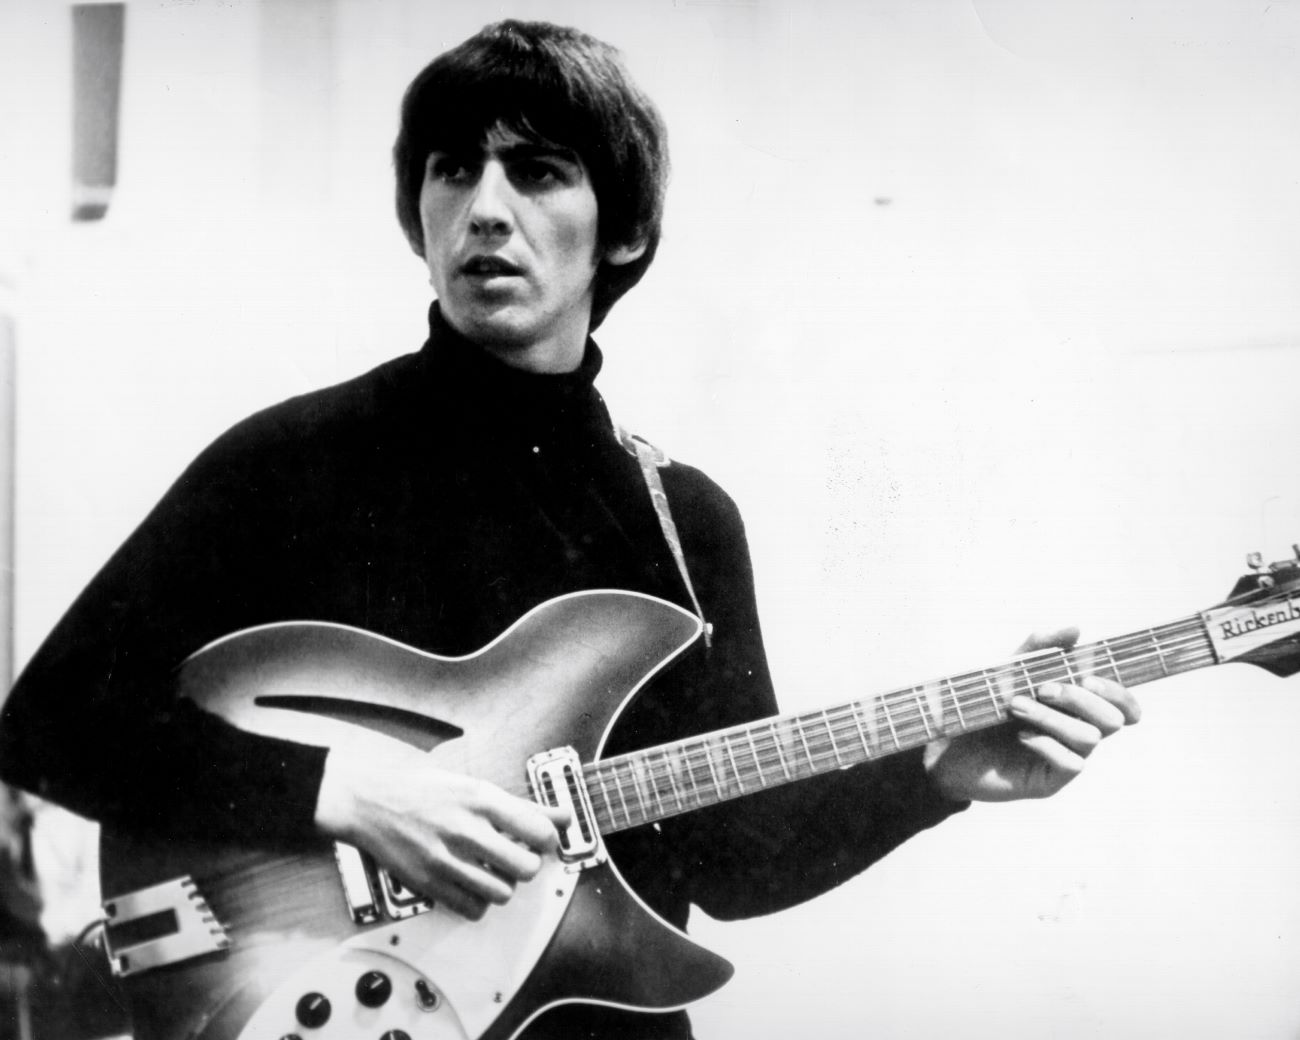 A black and white picture of The Beatles' George Harrison wearing a turtleneck and playing guitar.